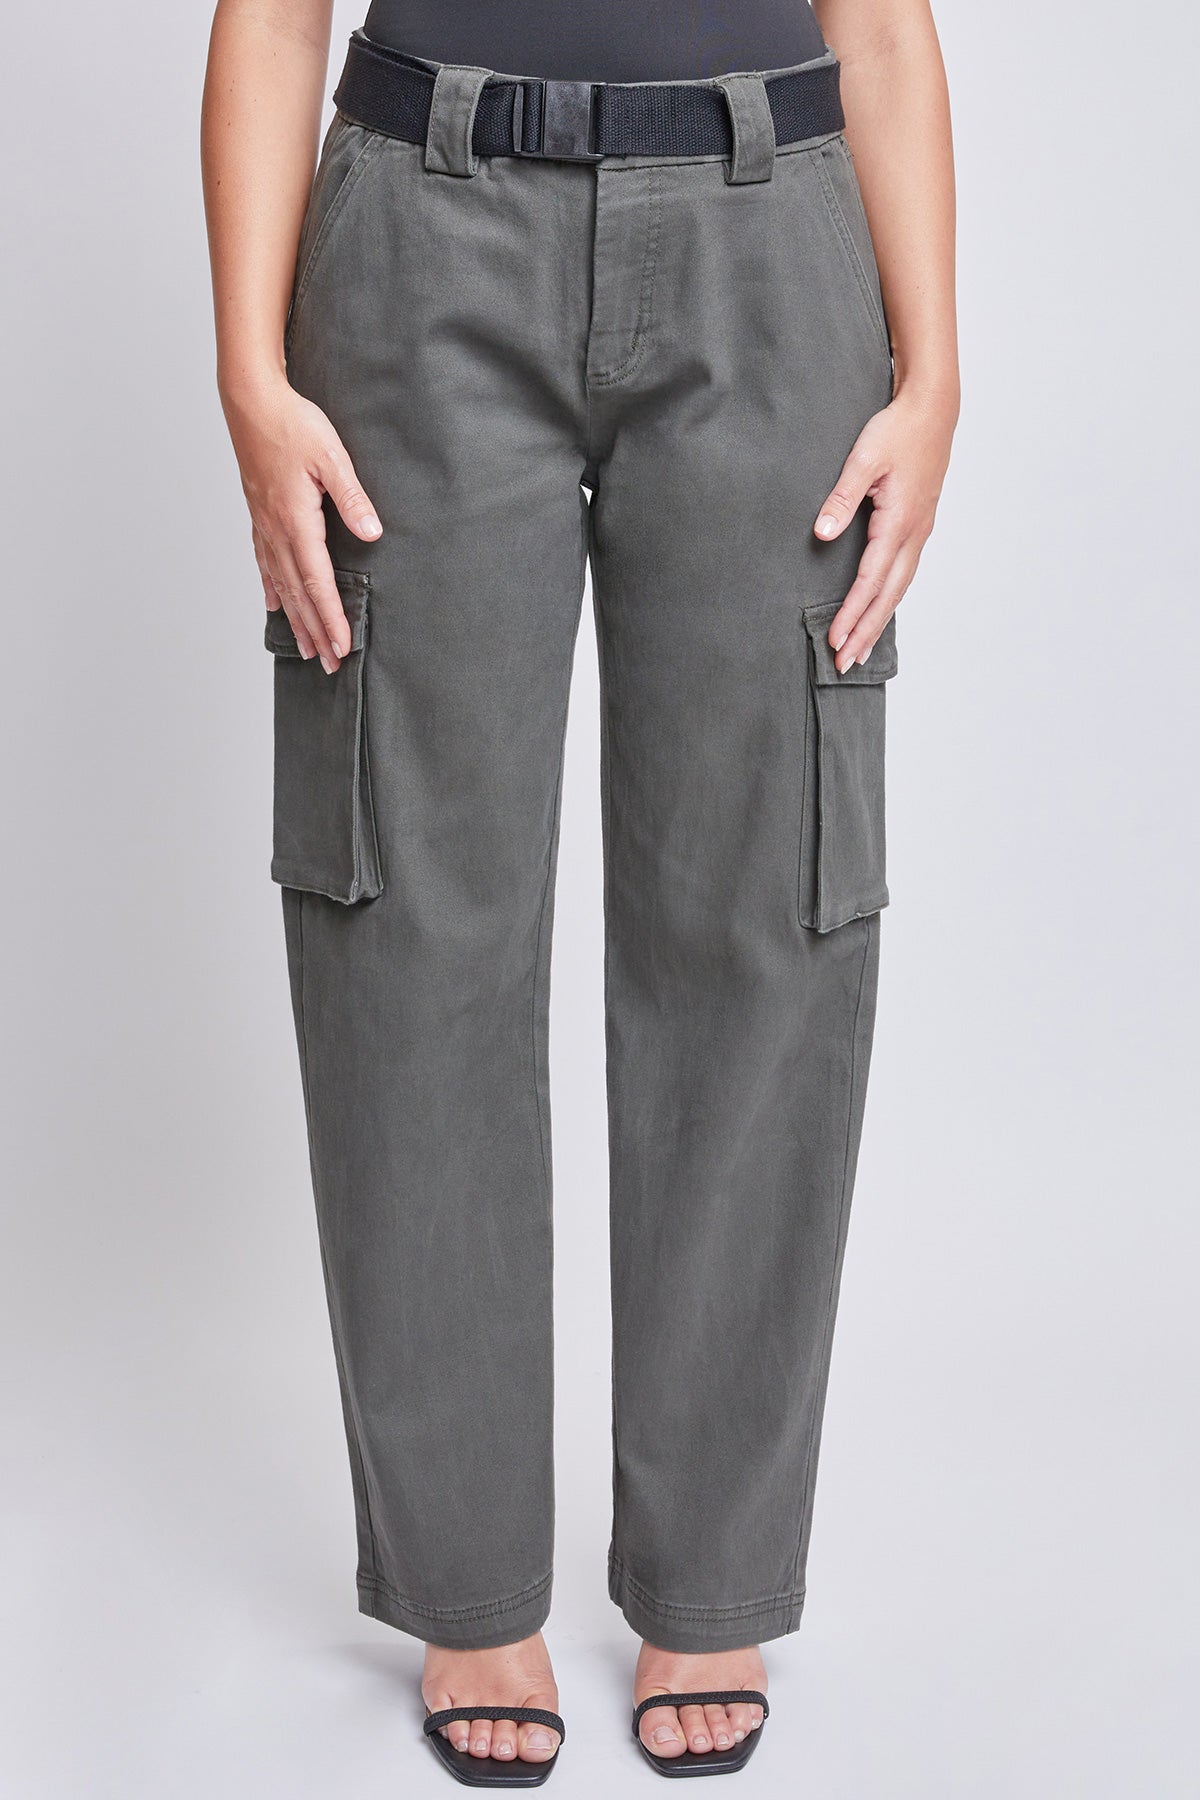 Women’s High Rise Belted Cargo Pants